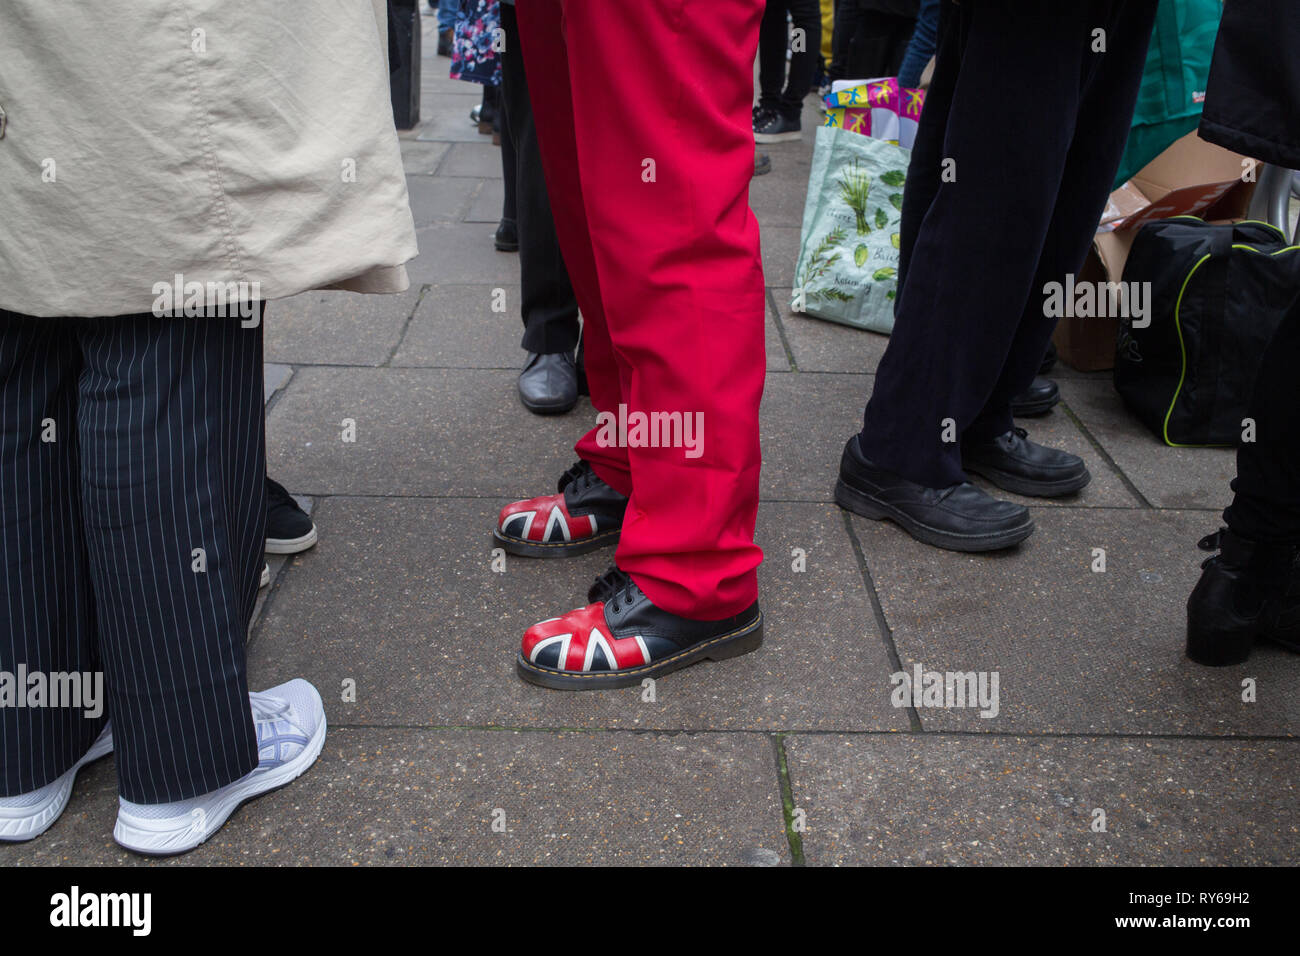 London, UK. 12th Mar, 2019. Pro Brexit demonstrators protests ahead of the meaningful vote in Parliament. Credit: Thabo Jaiyesimi/Alamy Live News Stock Photo